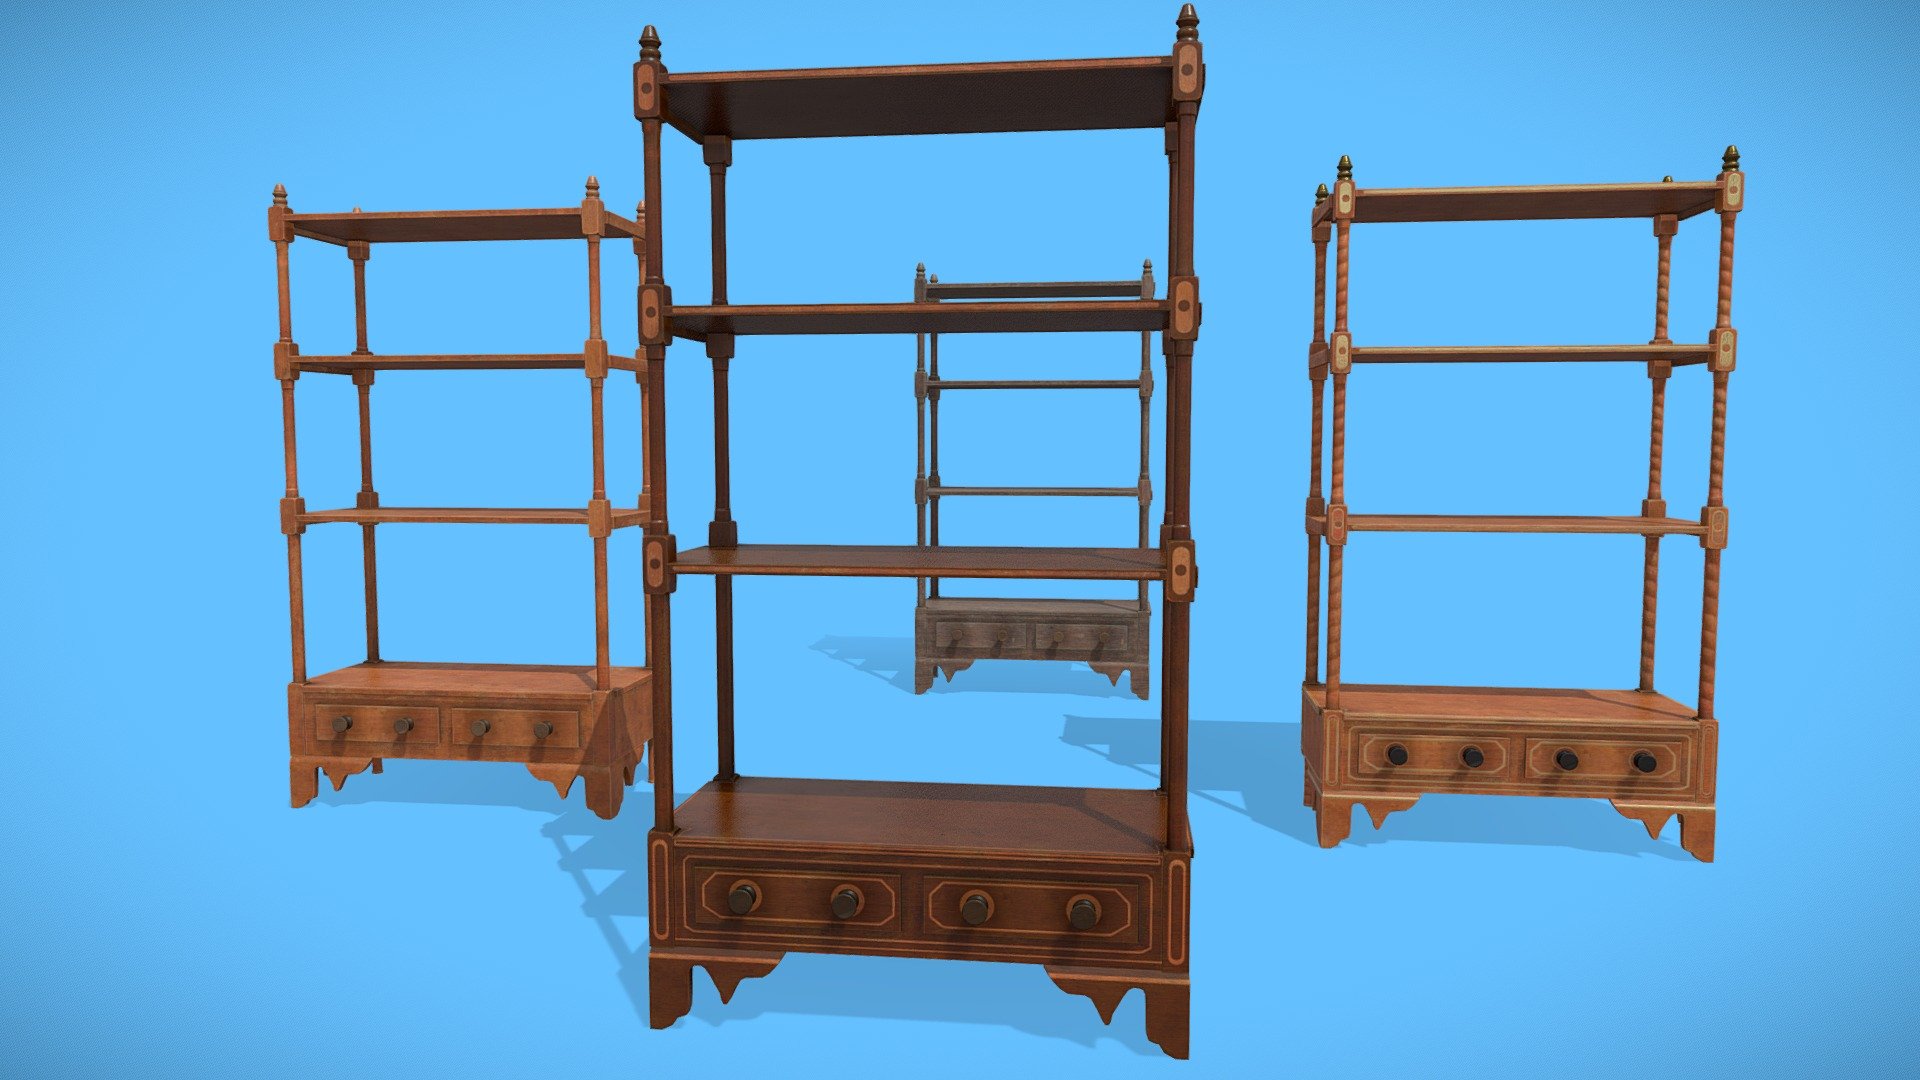 1800s Wooden Shelves with drawers - in four texture variations - 1800s Wooden Shelving Type A - Download Free 3D model by Mad_Lobster_Workshop 3d model